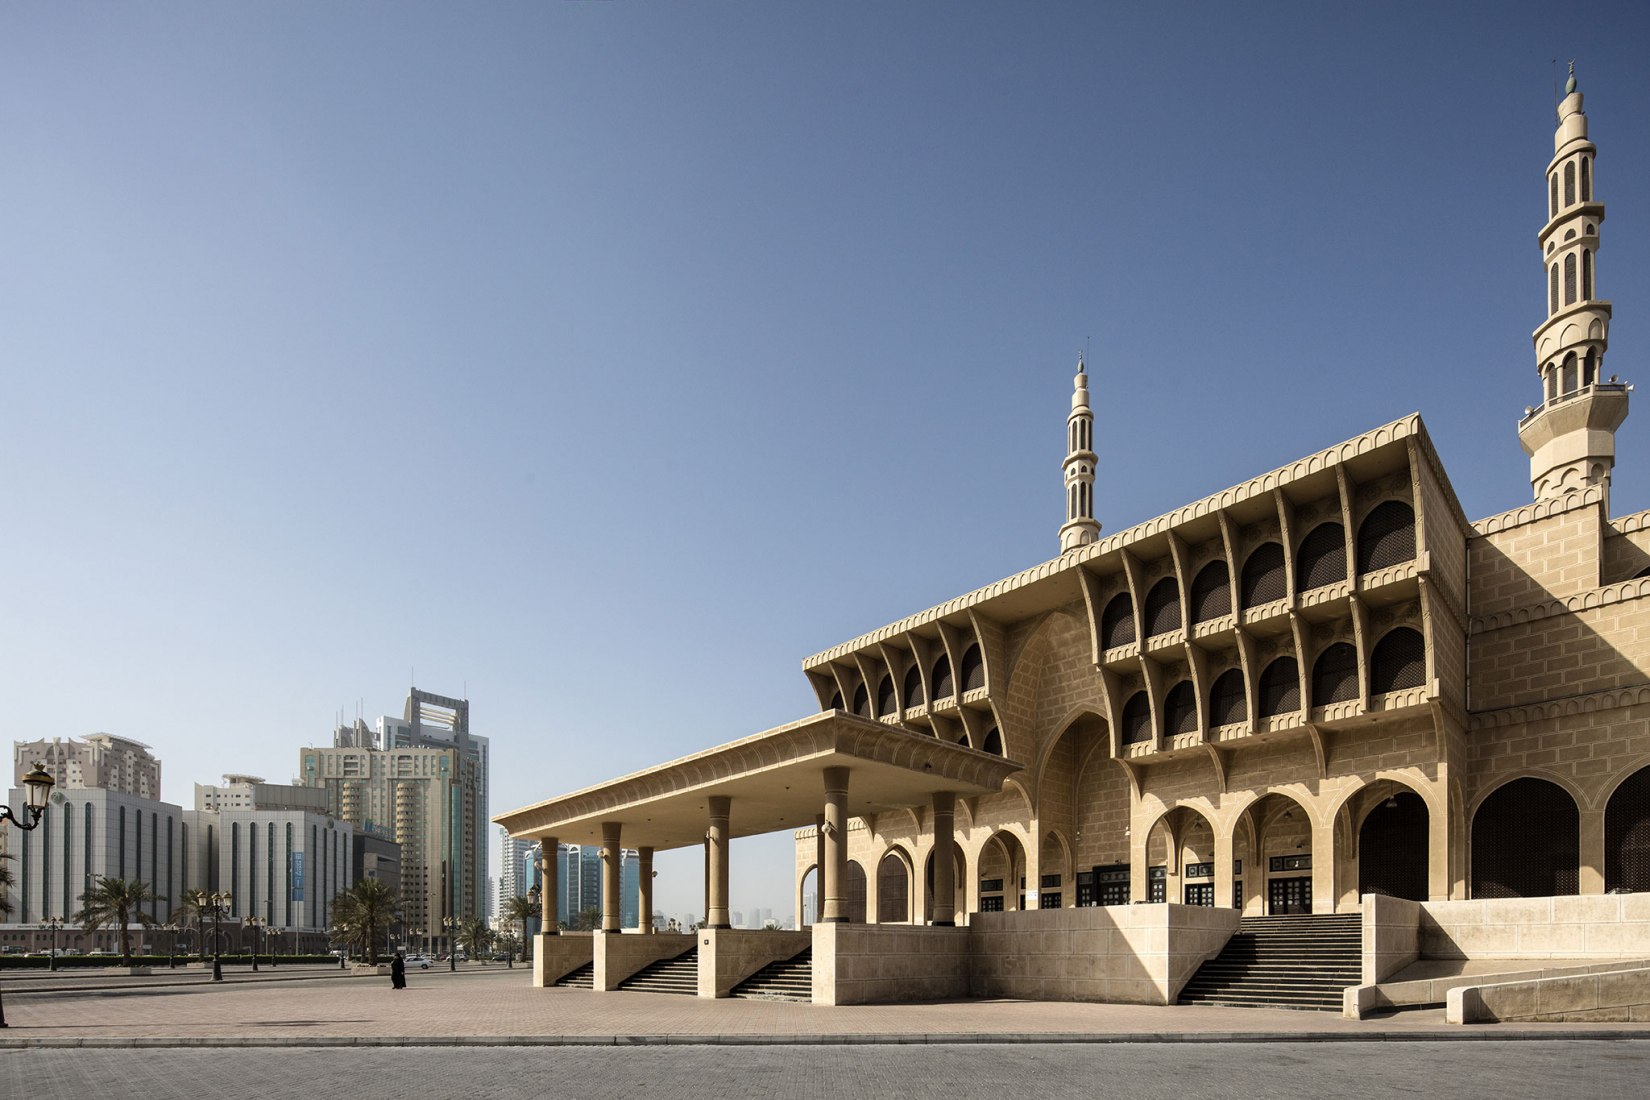 King Faisal Mosque, King Abdul Aziz Street, Sharjah, Office of Technical & Architectural Engineering & Consultancy, 1987. Photograph by Ieva Saudargaite.